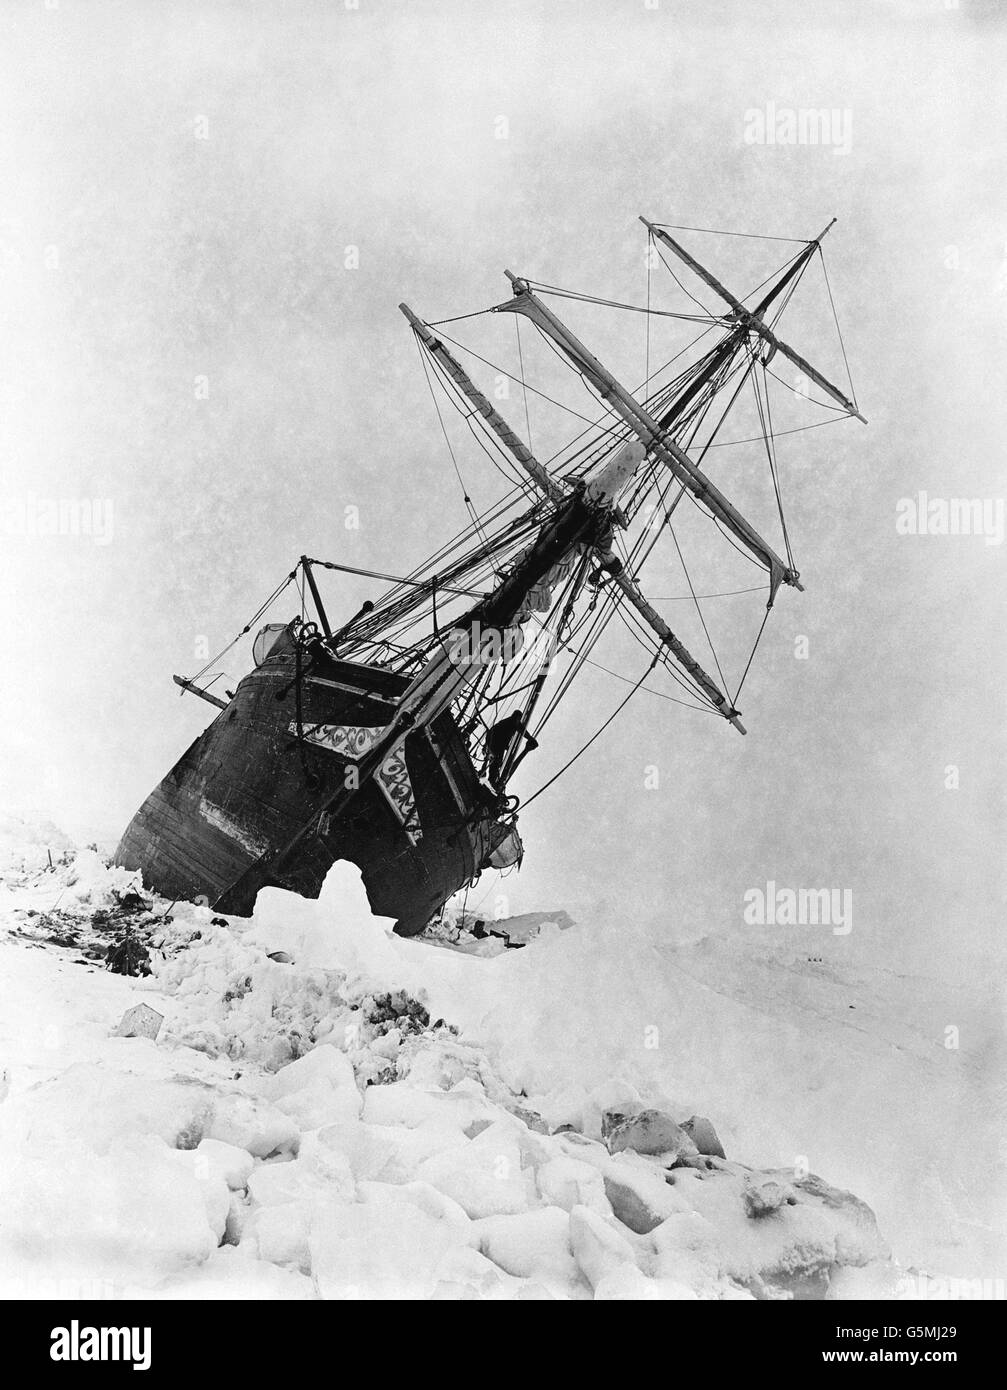 The Endurance nipped: For two months before she went down the Endurance was the centre of an ice pressure. The picture shows her caught between two immense ice floes in which she was squeezed. It took only 15 seconds for her to be shifted into this position. Endurance finally sank on October 27th 1915. Stock Photo